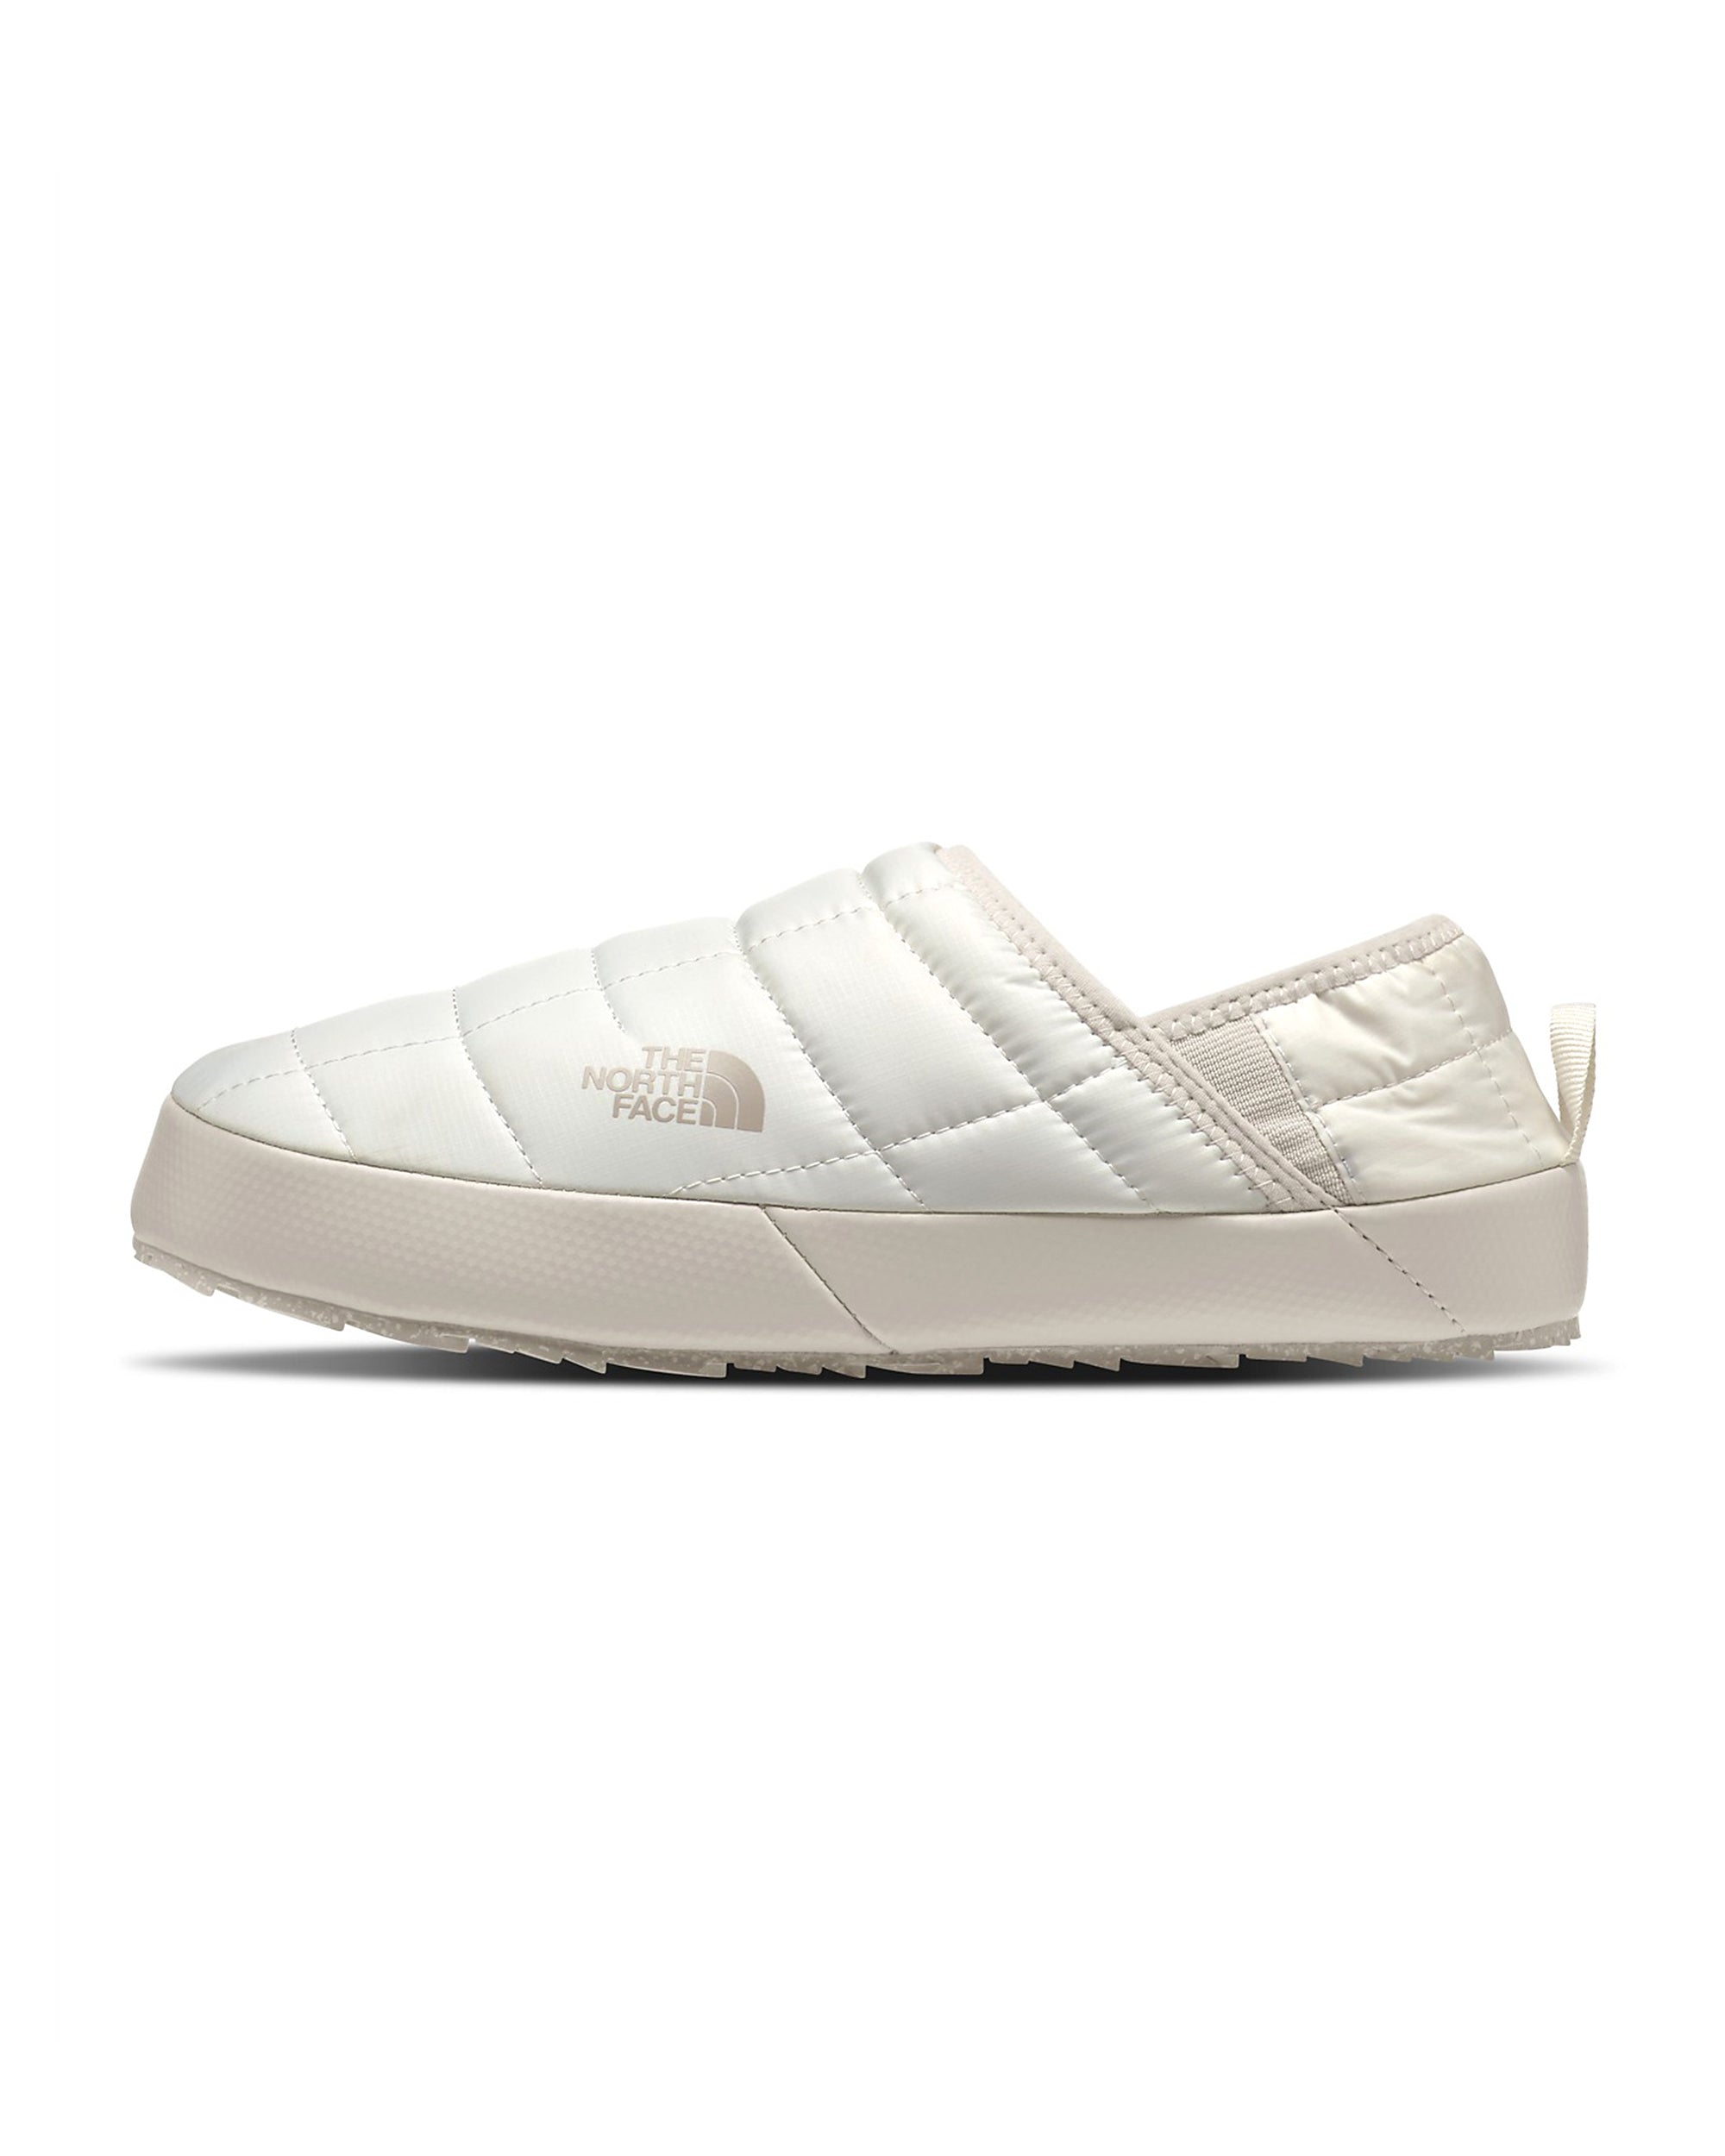 Womens Thermoball Traction V Mule - Gardenia White / Silver Gray